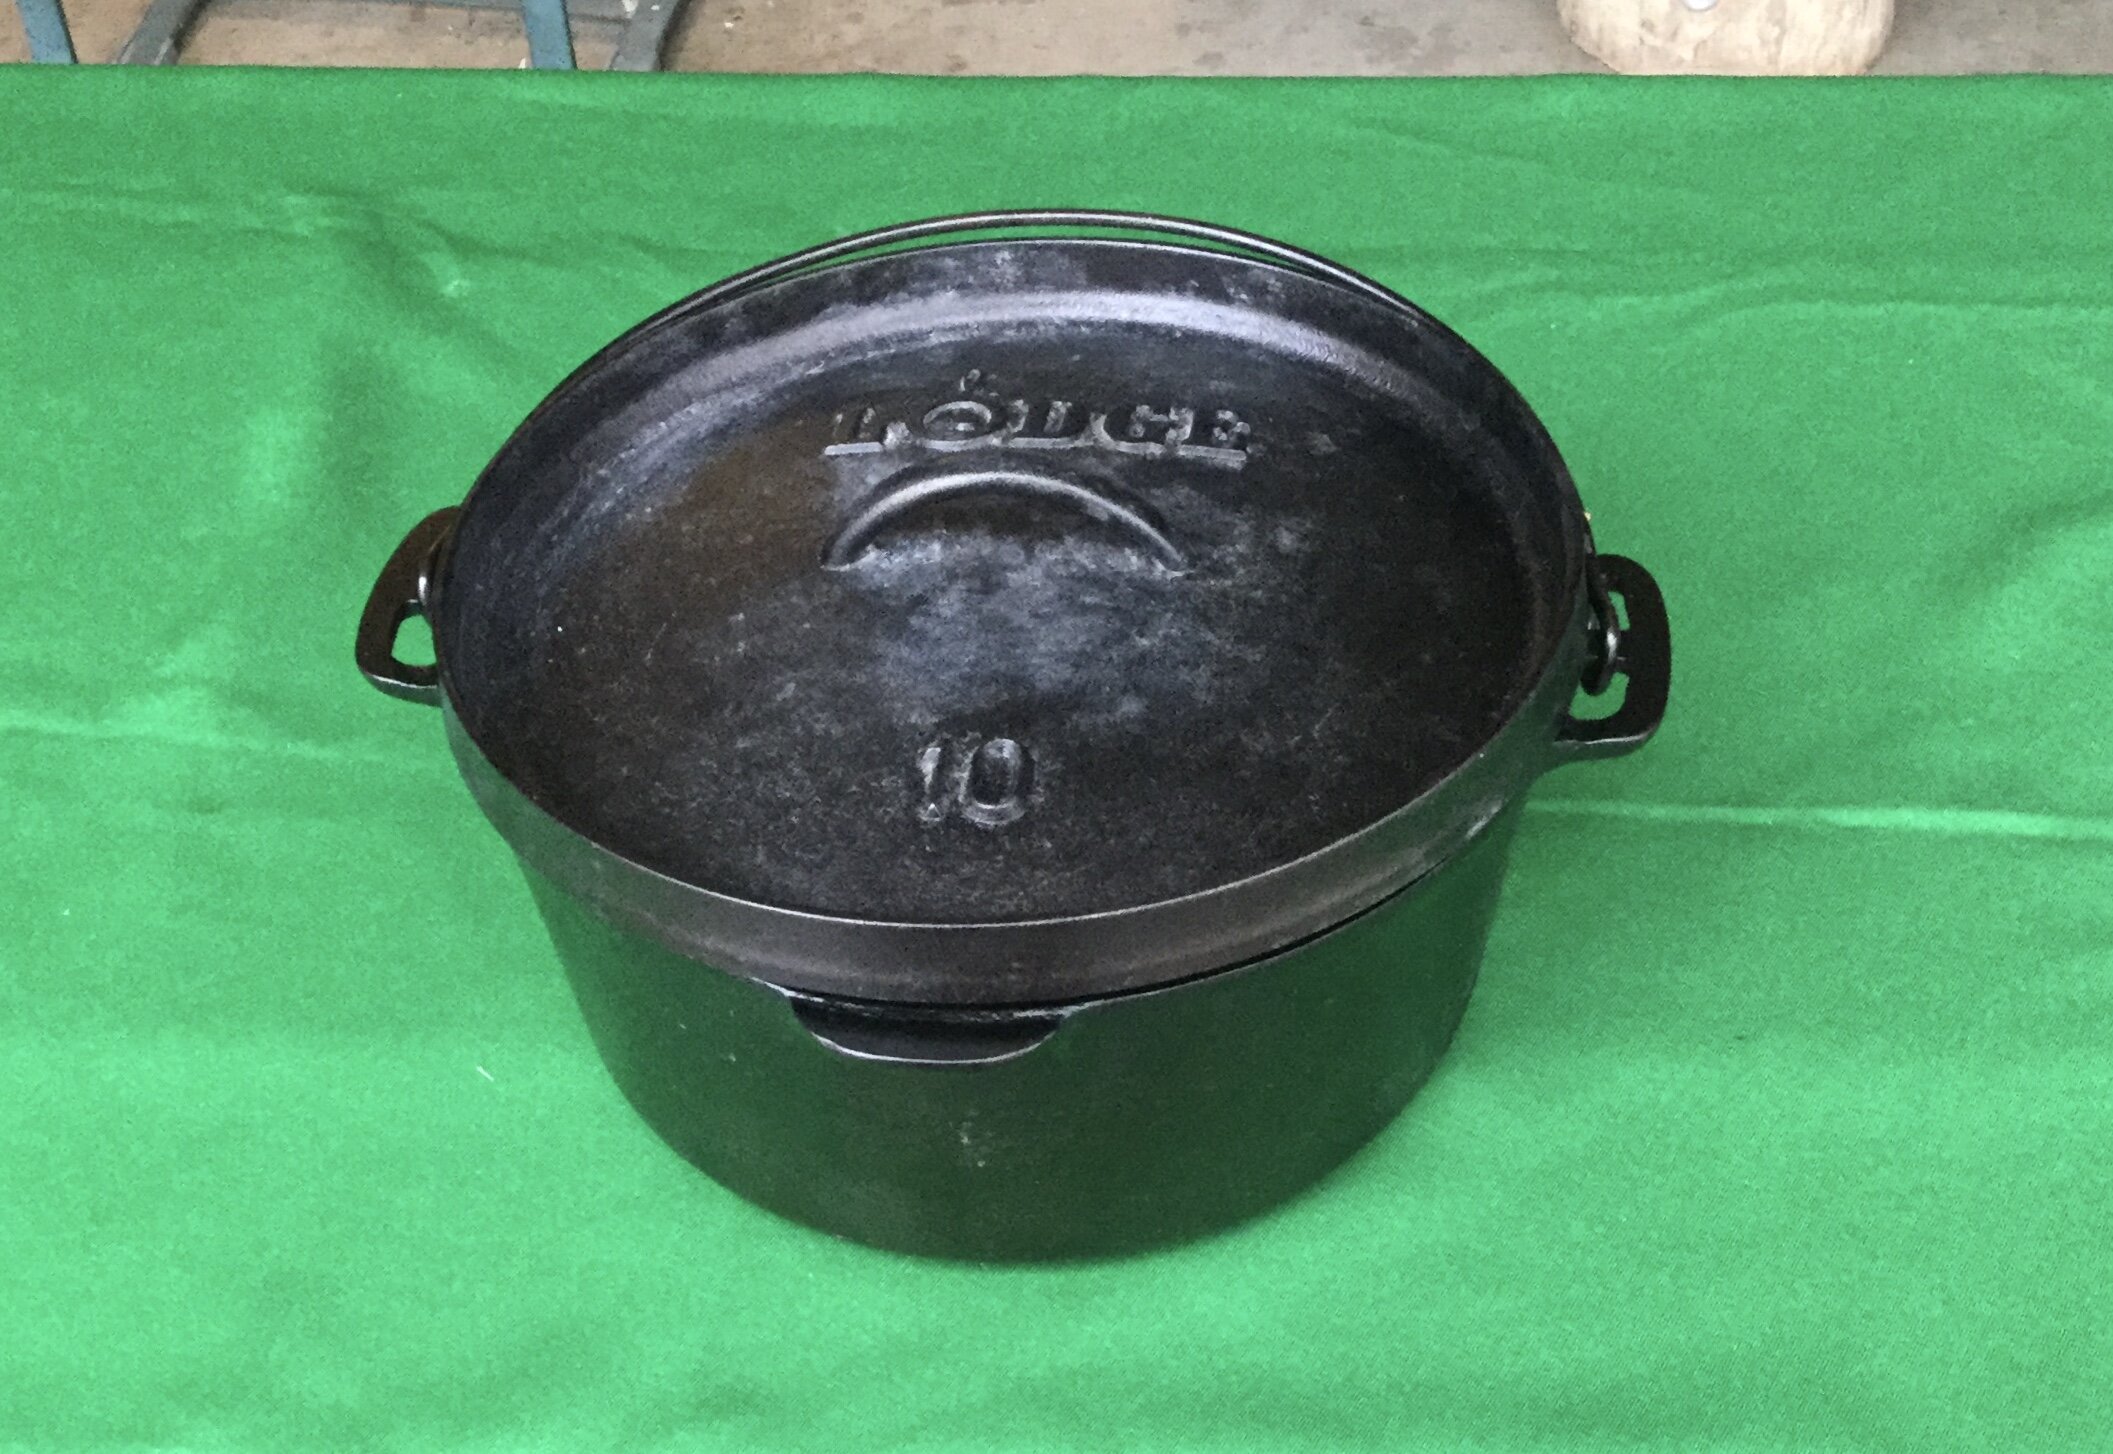 Wagner No. 10 Cast Iron Large Dutch Oven Pot/Pan Skillet Flat Lid Cover